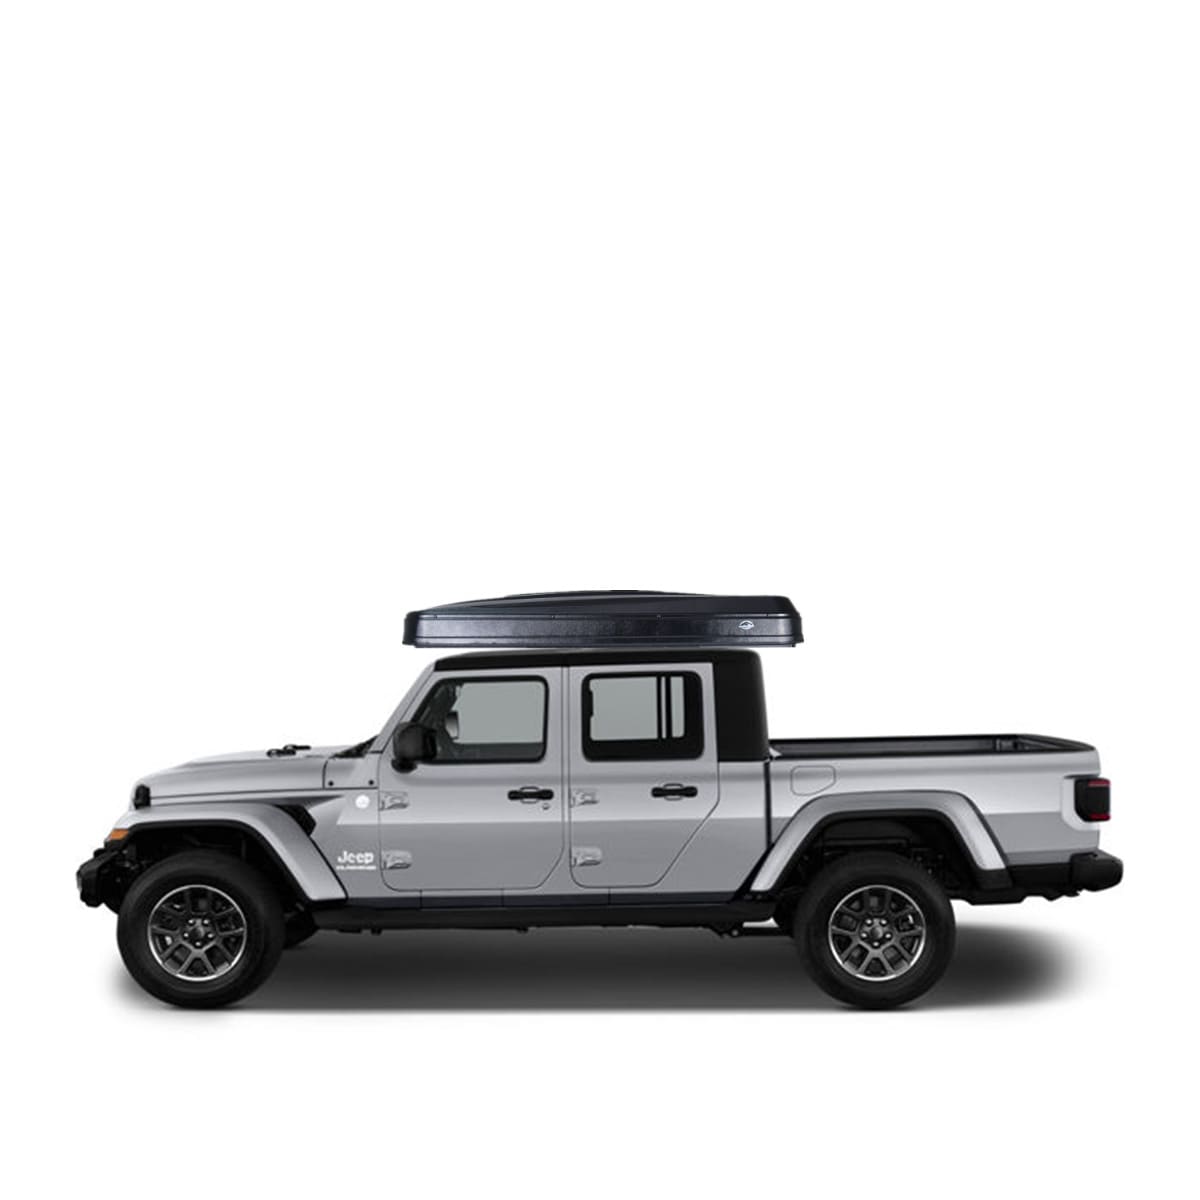 2~3 Person ABS Hard Shell Pop-Up Rooftop Tent - BENEHIKE